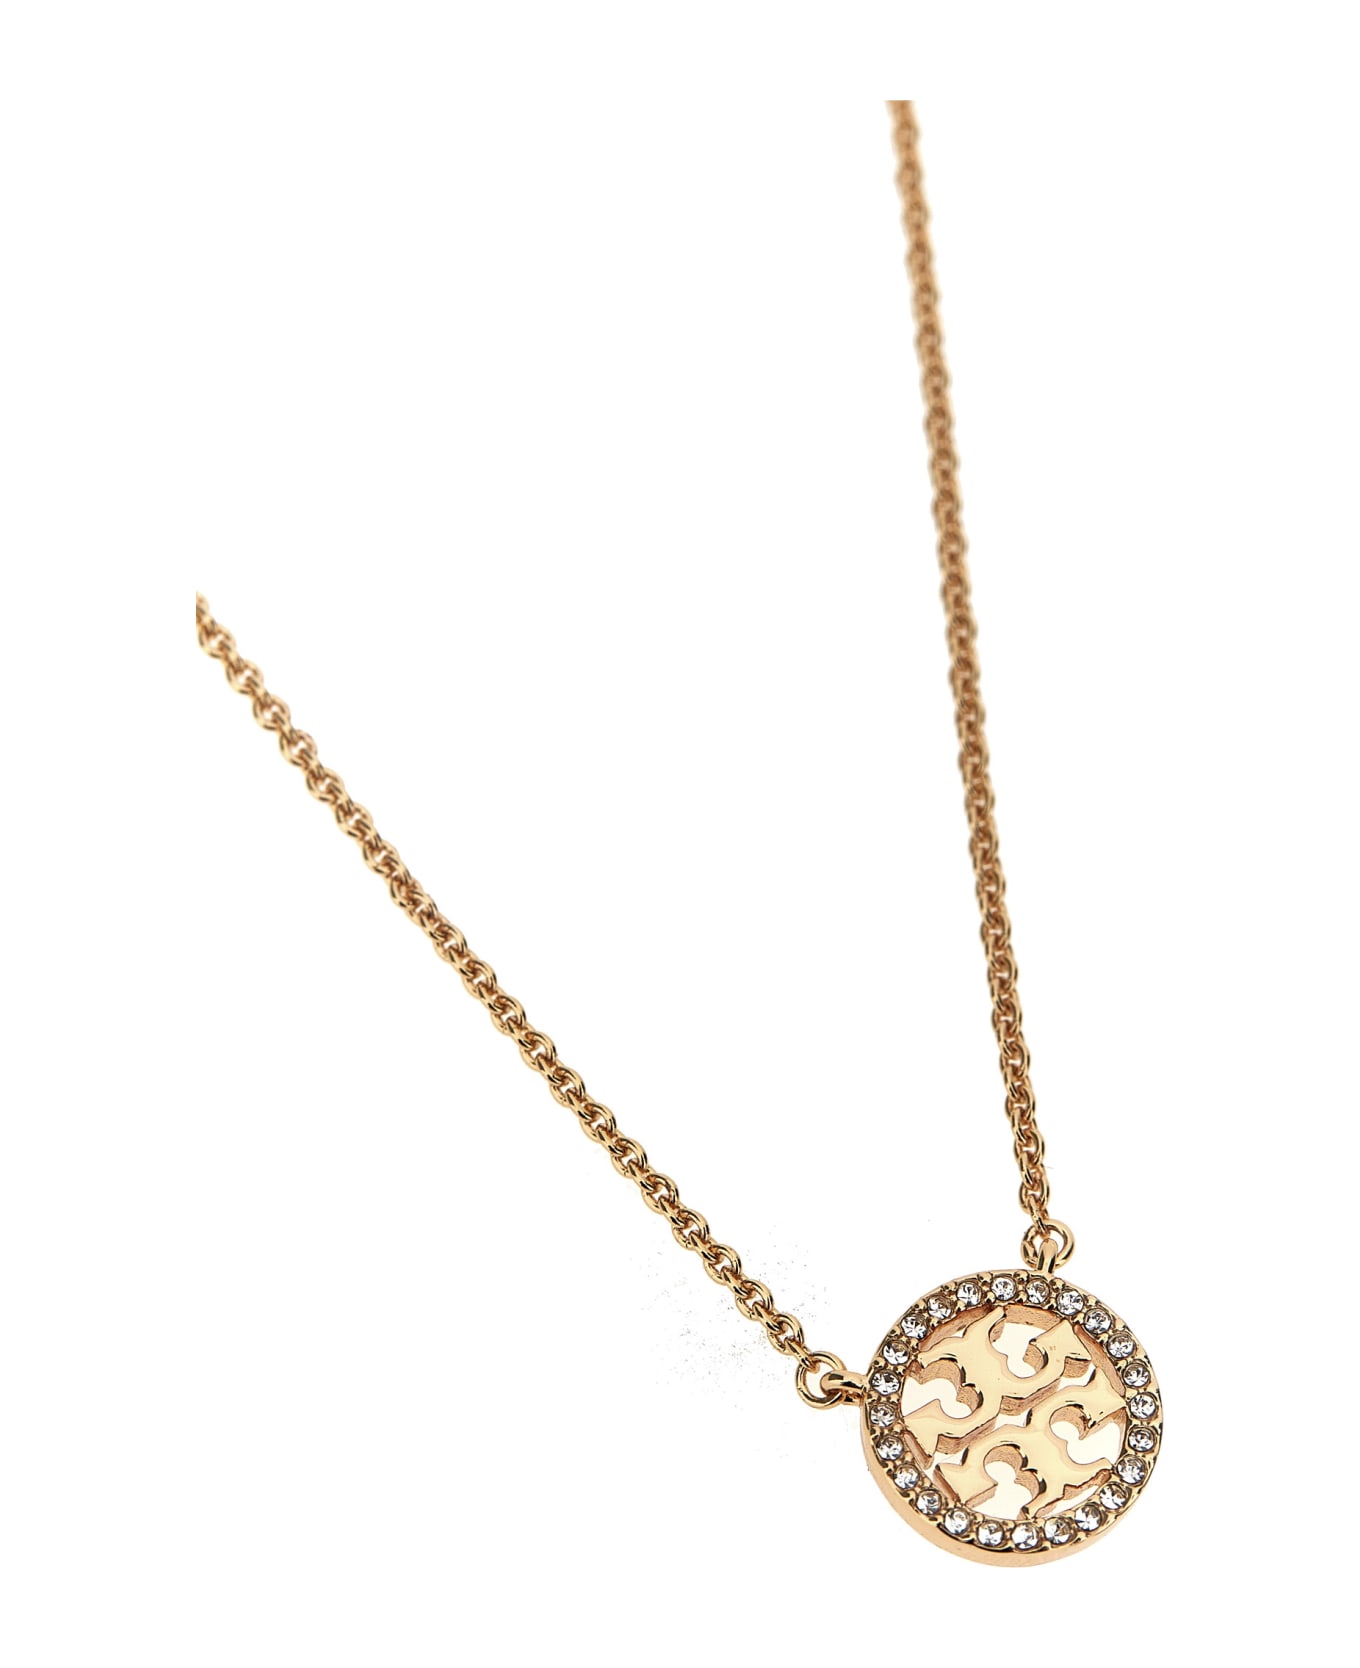 Tory Burch Miller Necklace - ROSA ブレスレット